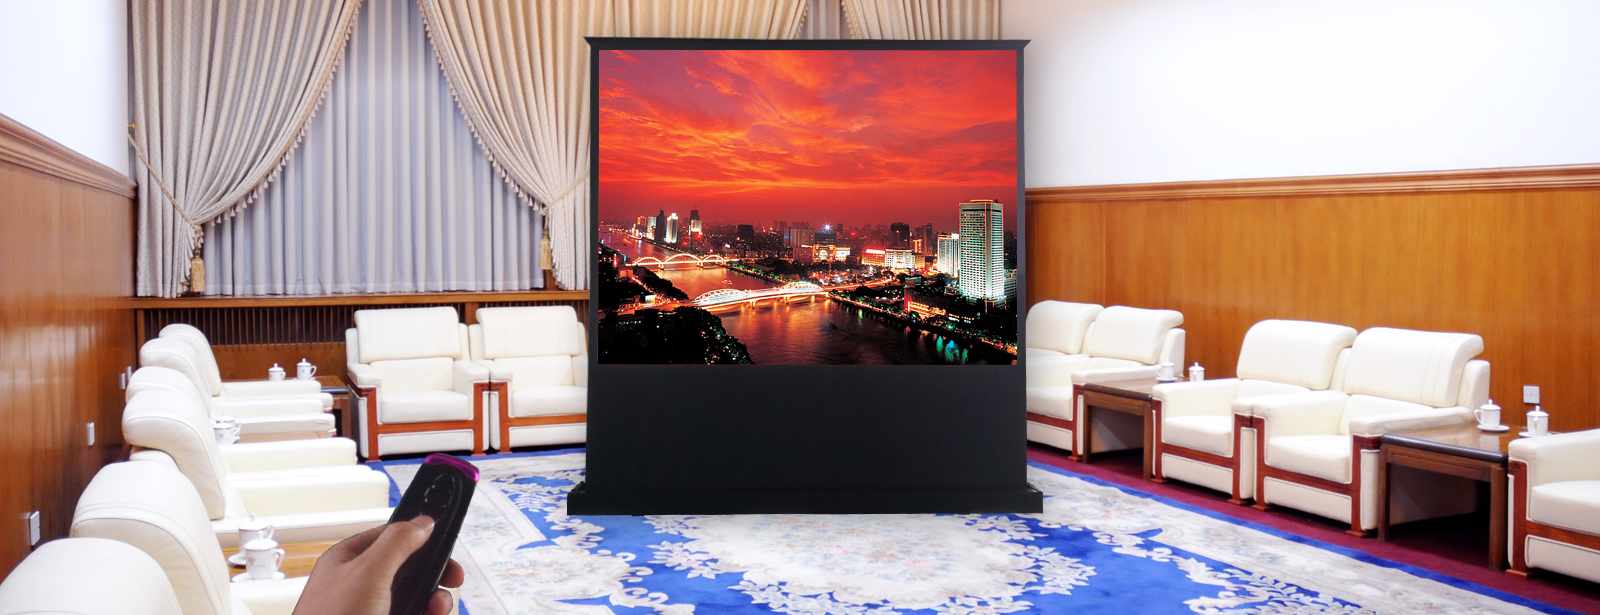 category-Pull Up Projector Screens Floor Rising Screen - Xiong-yun-XY Screens-img-1